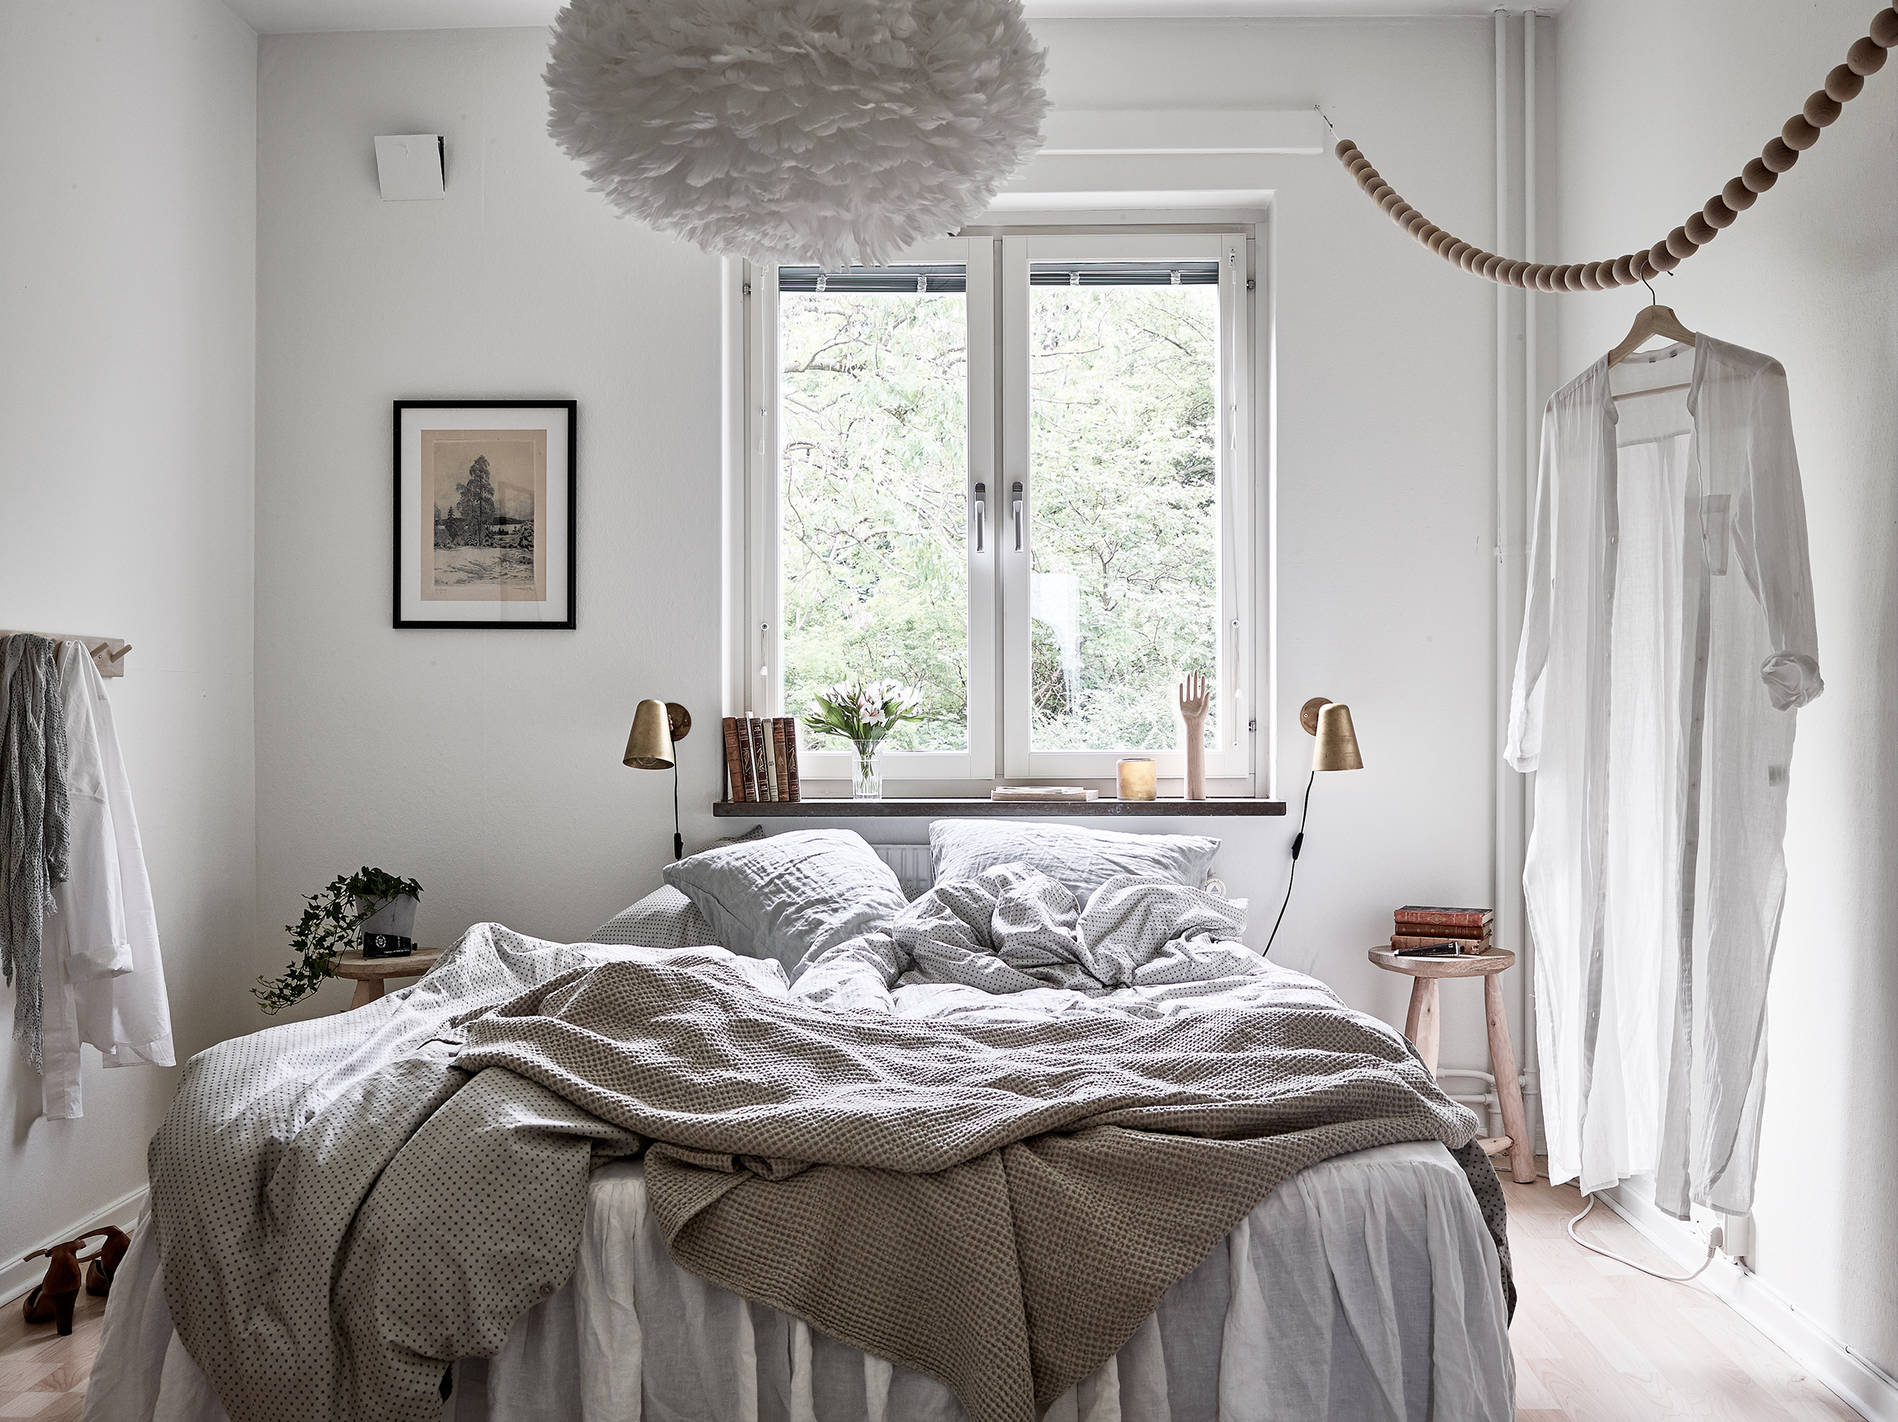 Dreamy bedroom - and how to get the look - via cocolapinedesign.com